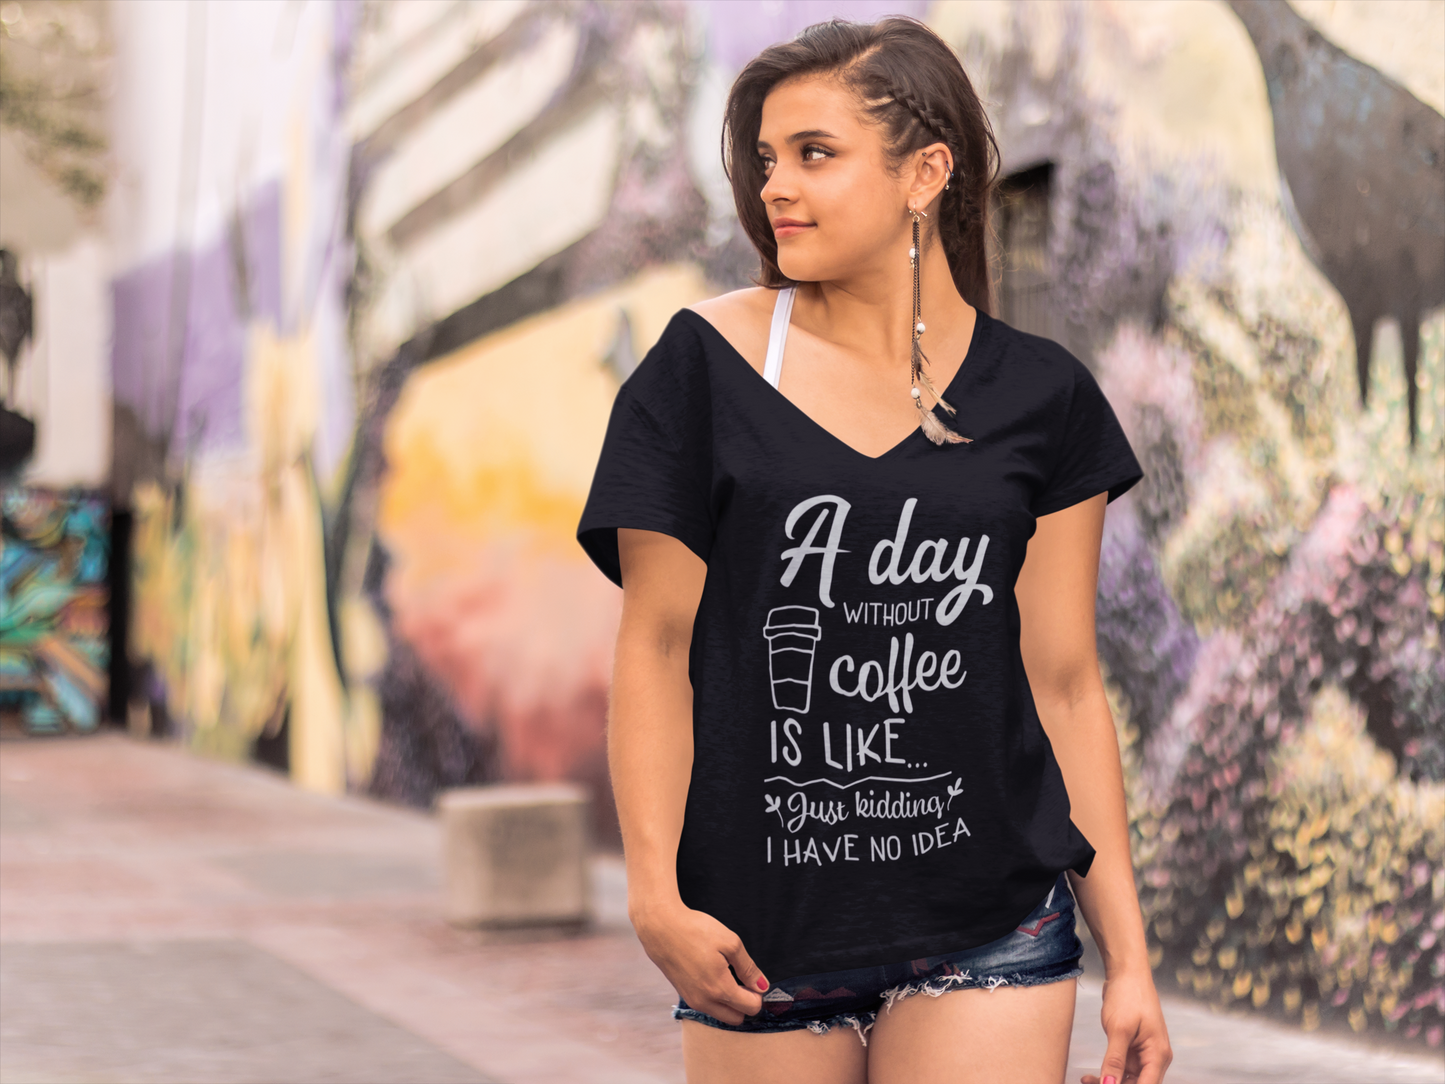 ULTRABASIC Women's T-Shirt A Day Without Coffee is Like - Funny Tee Shirt Tops